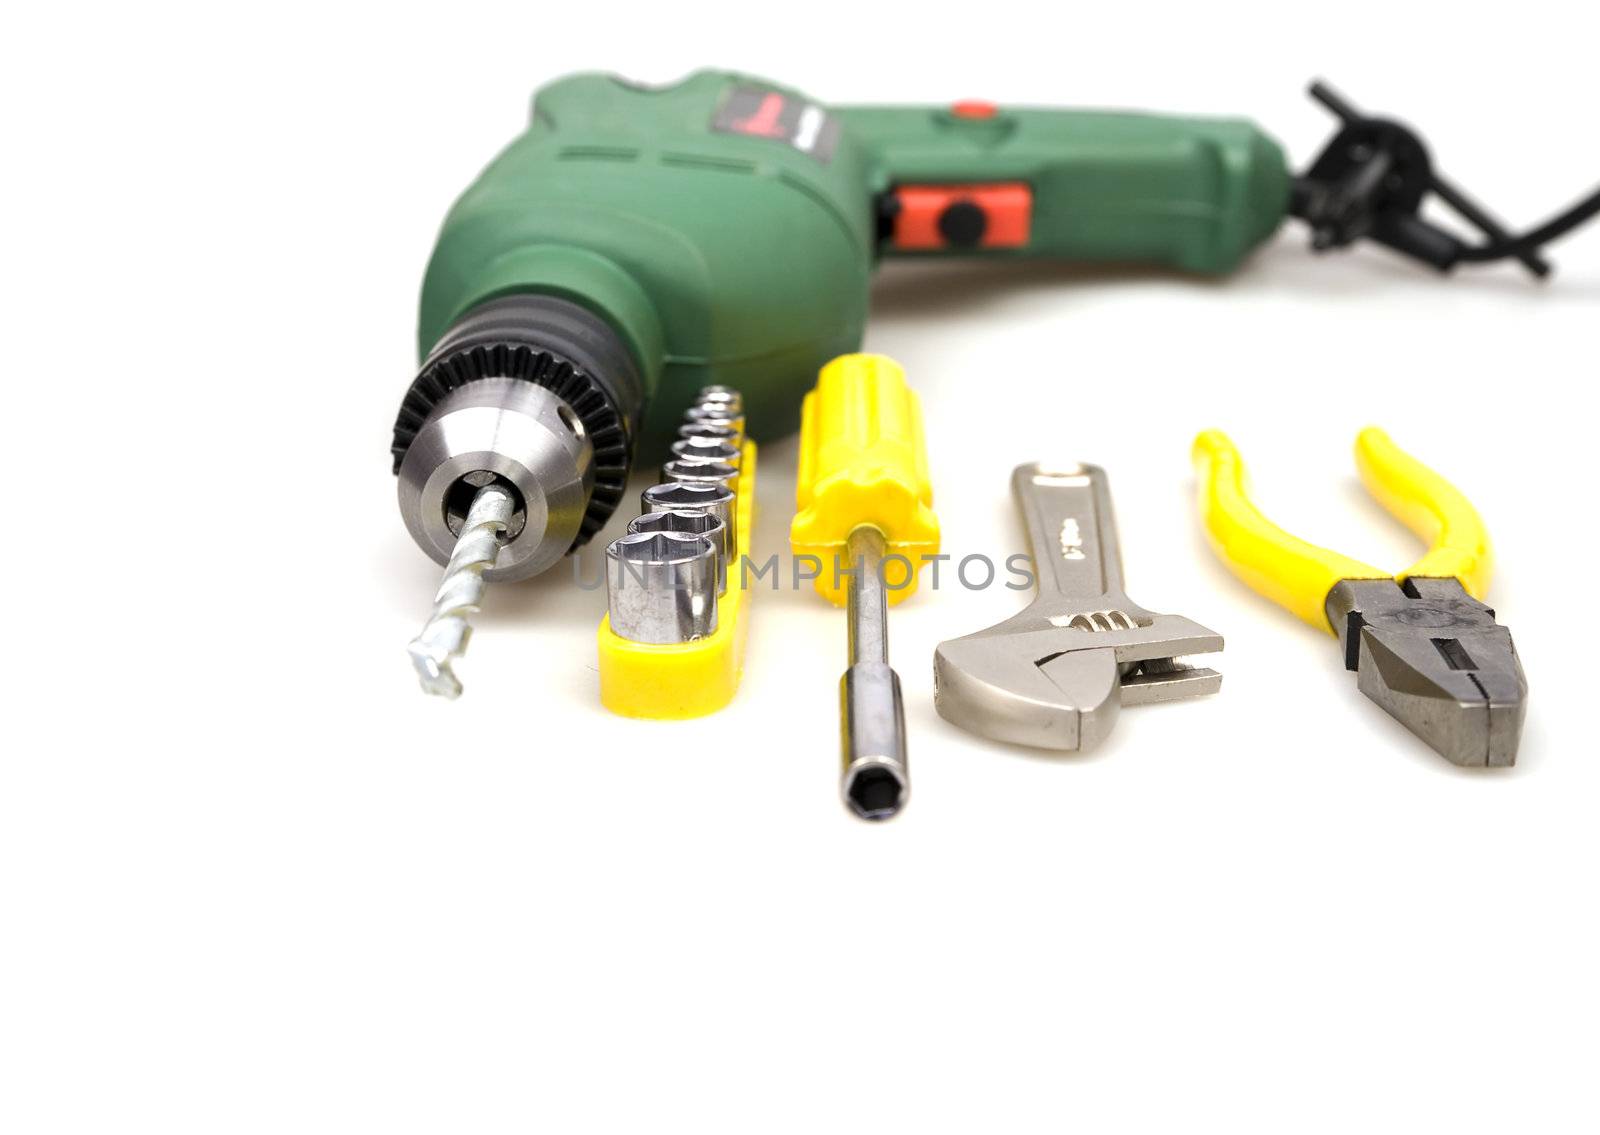 drill and other tools by Serp